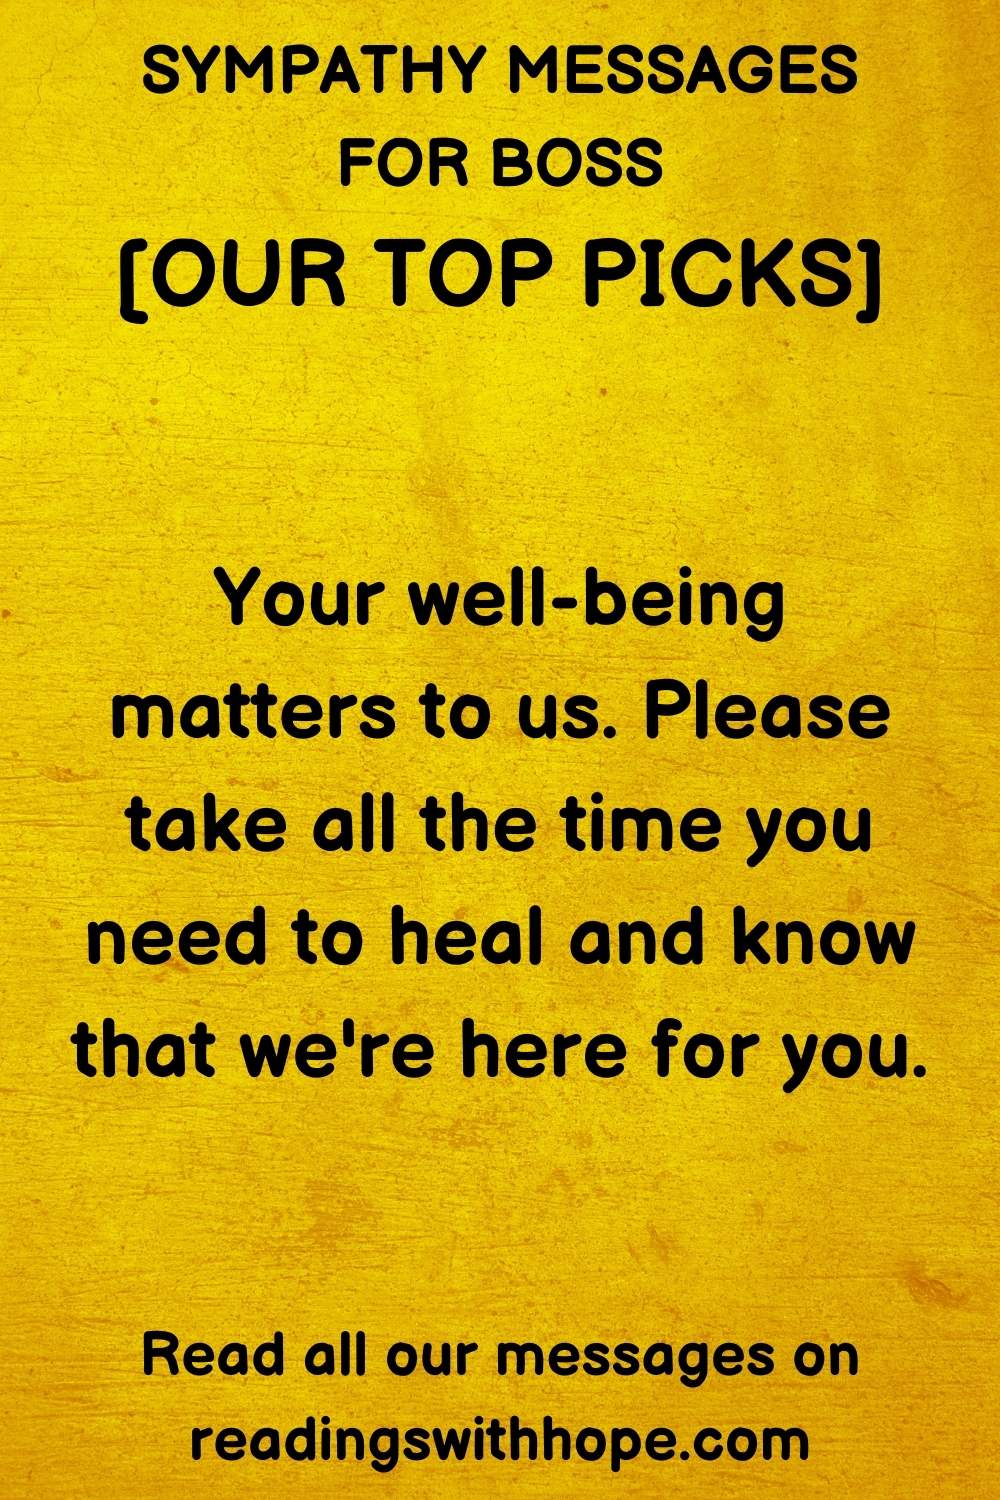 sympathy message for boss that says your well-being matters to us. Please take all the time you need to heal and know that we're here for you.